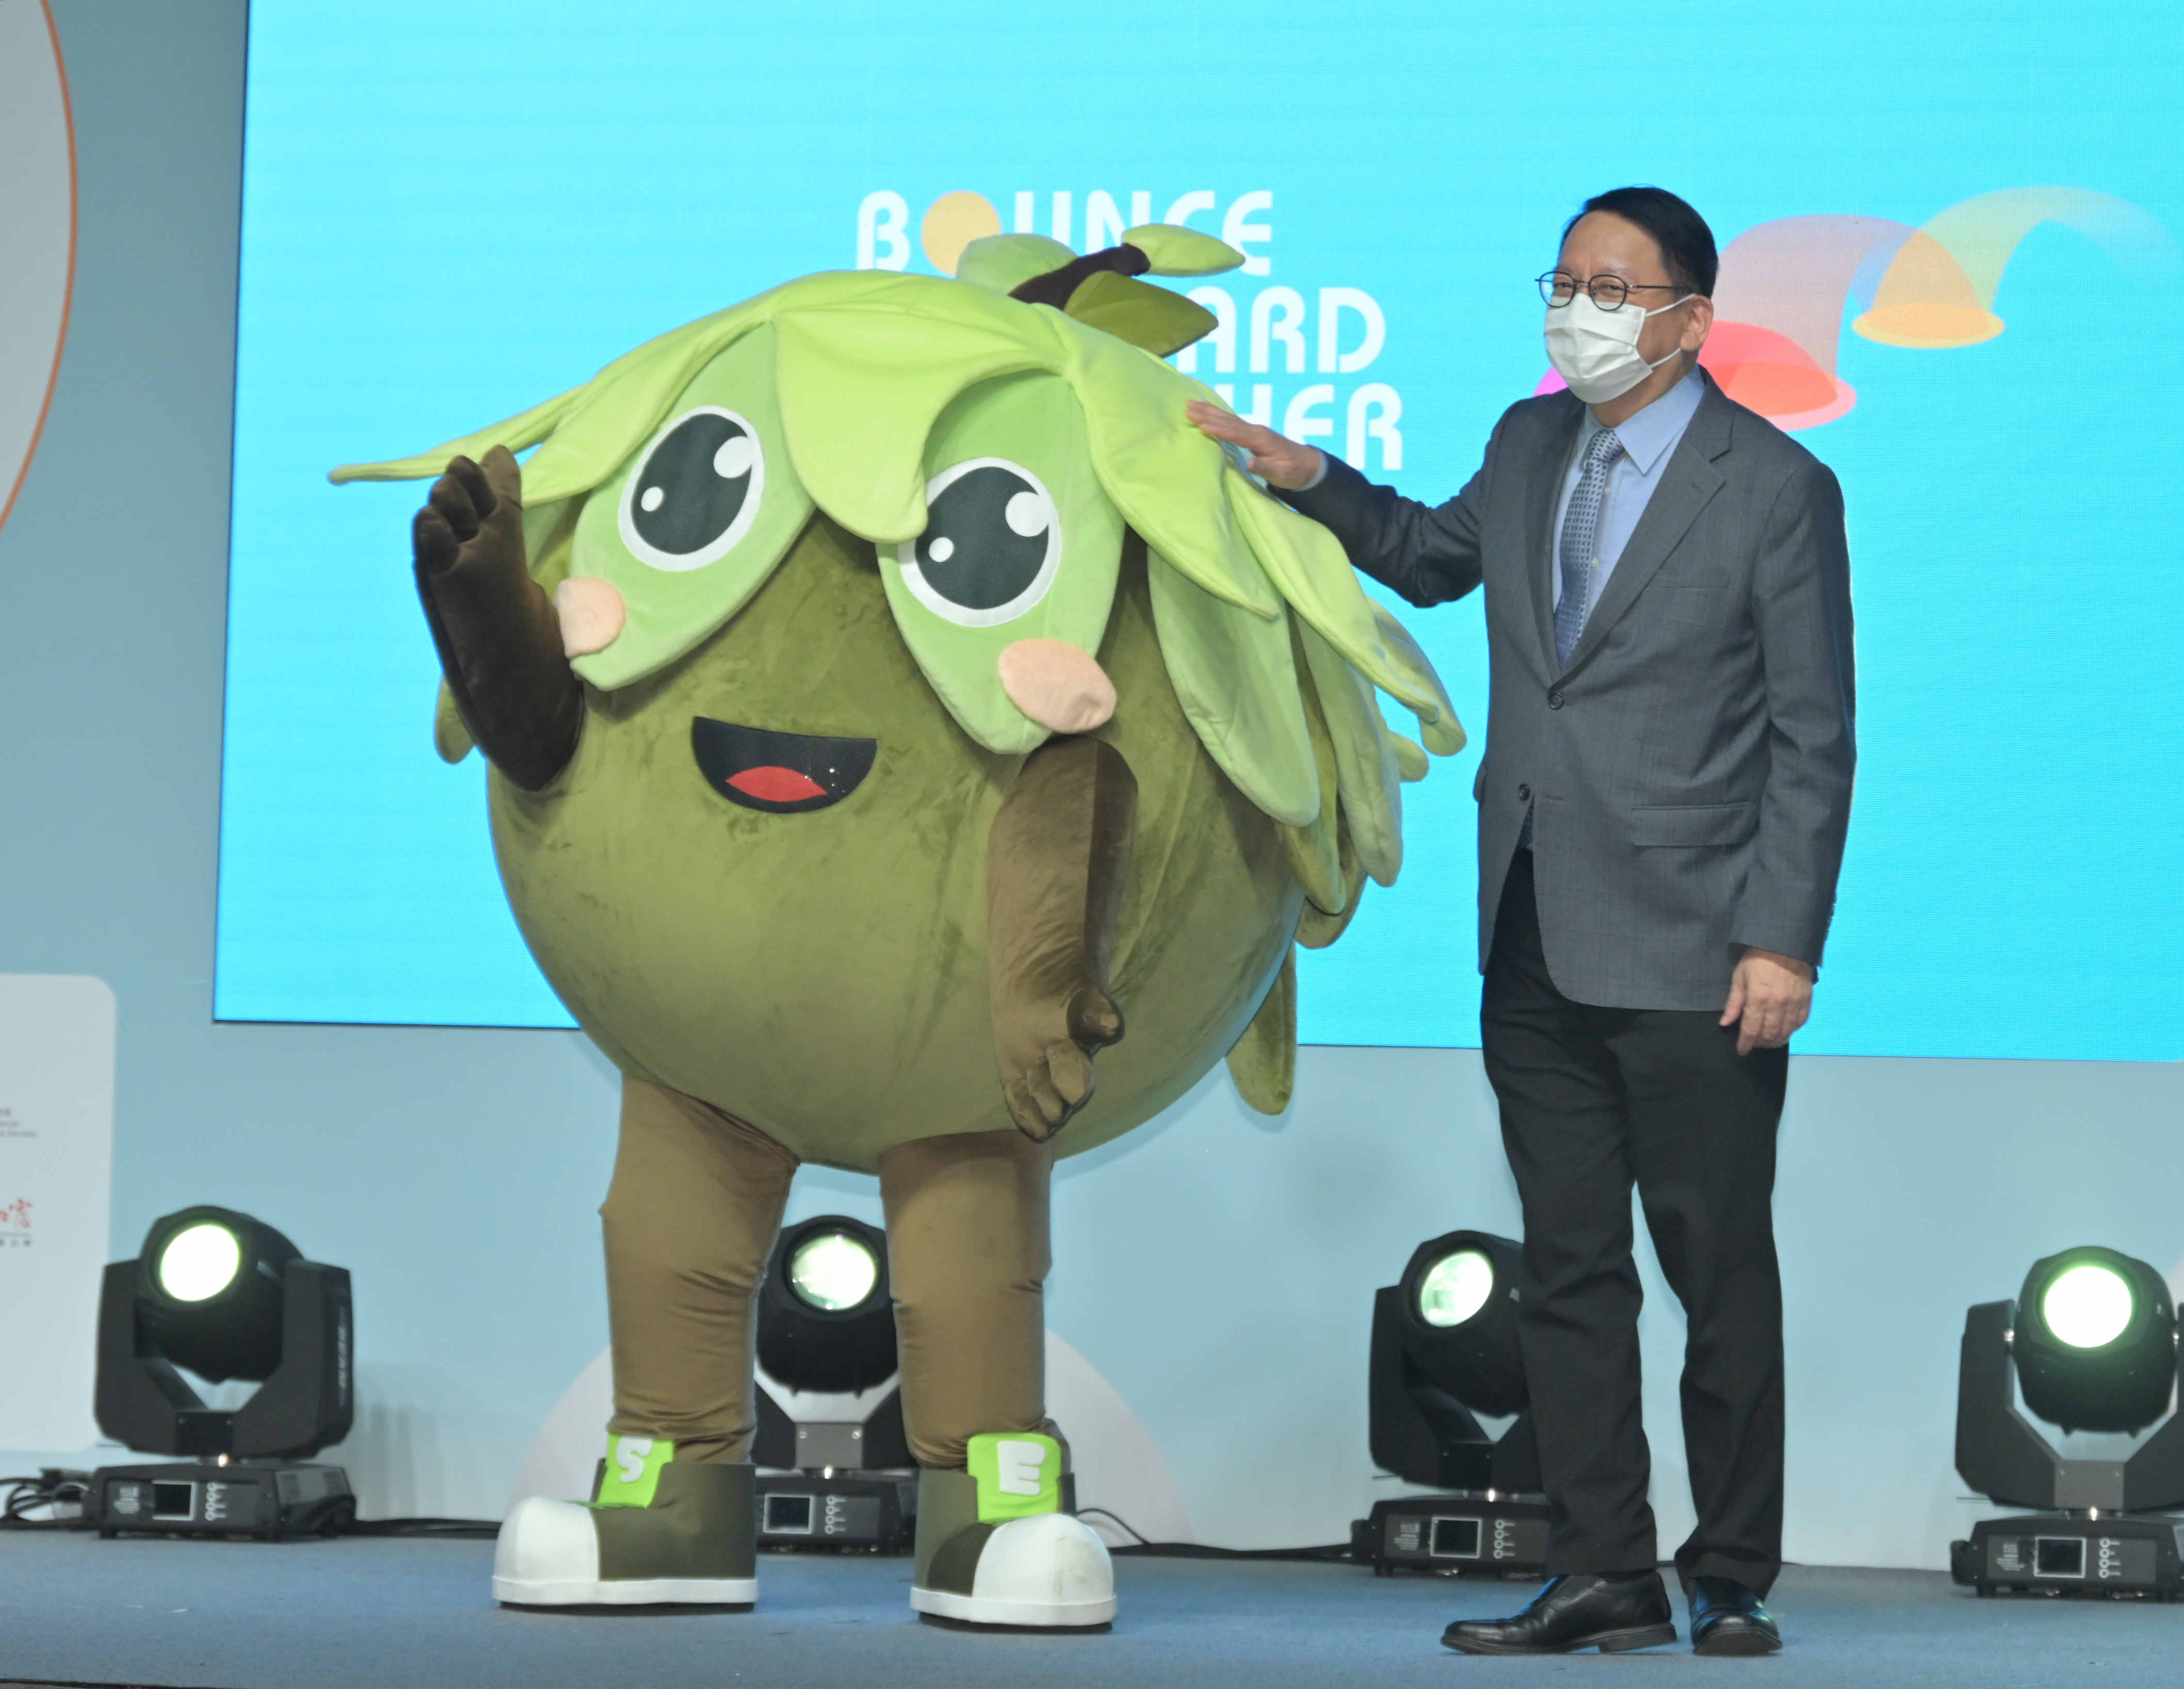 The Chief Secretary for Administration, Mr Chan Kwok-ki, and the social enterprise mascot Bloomy the Tree at the event.